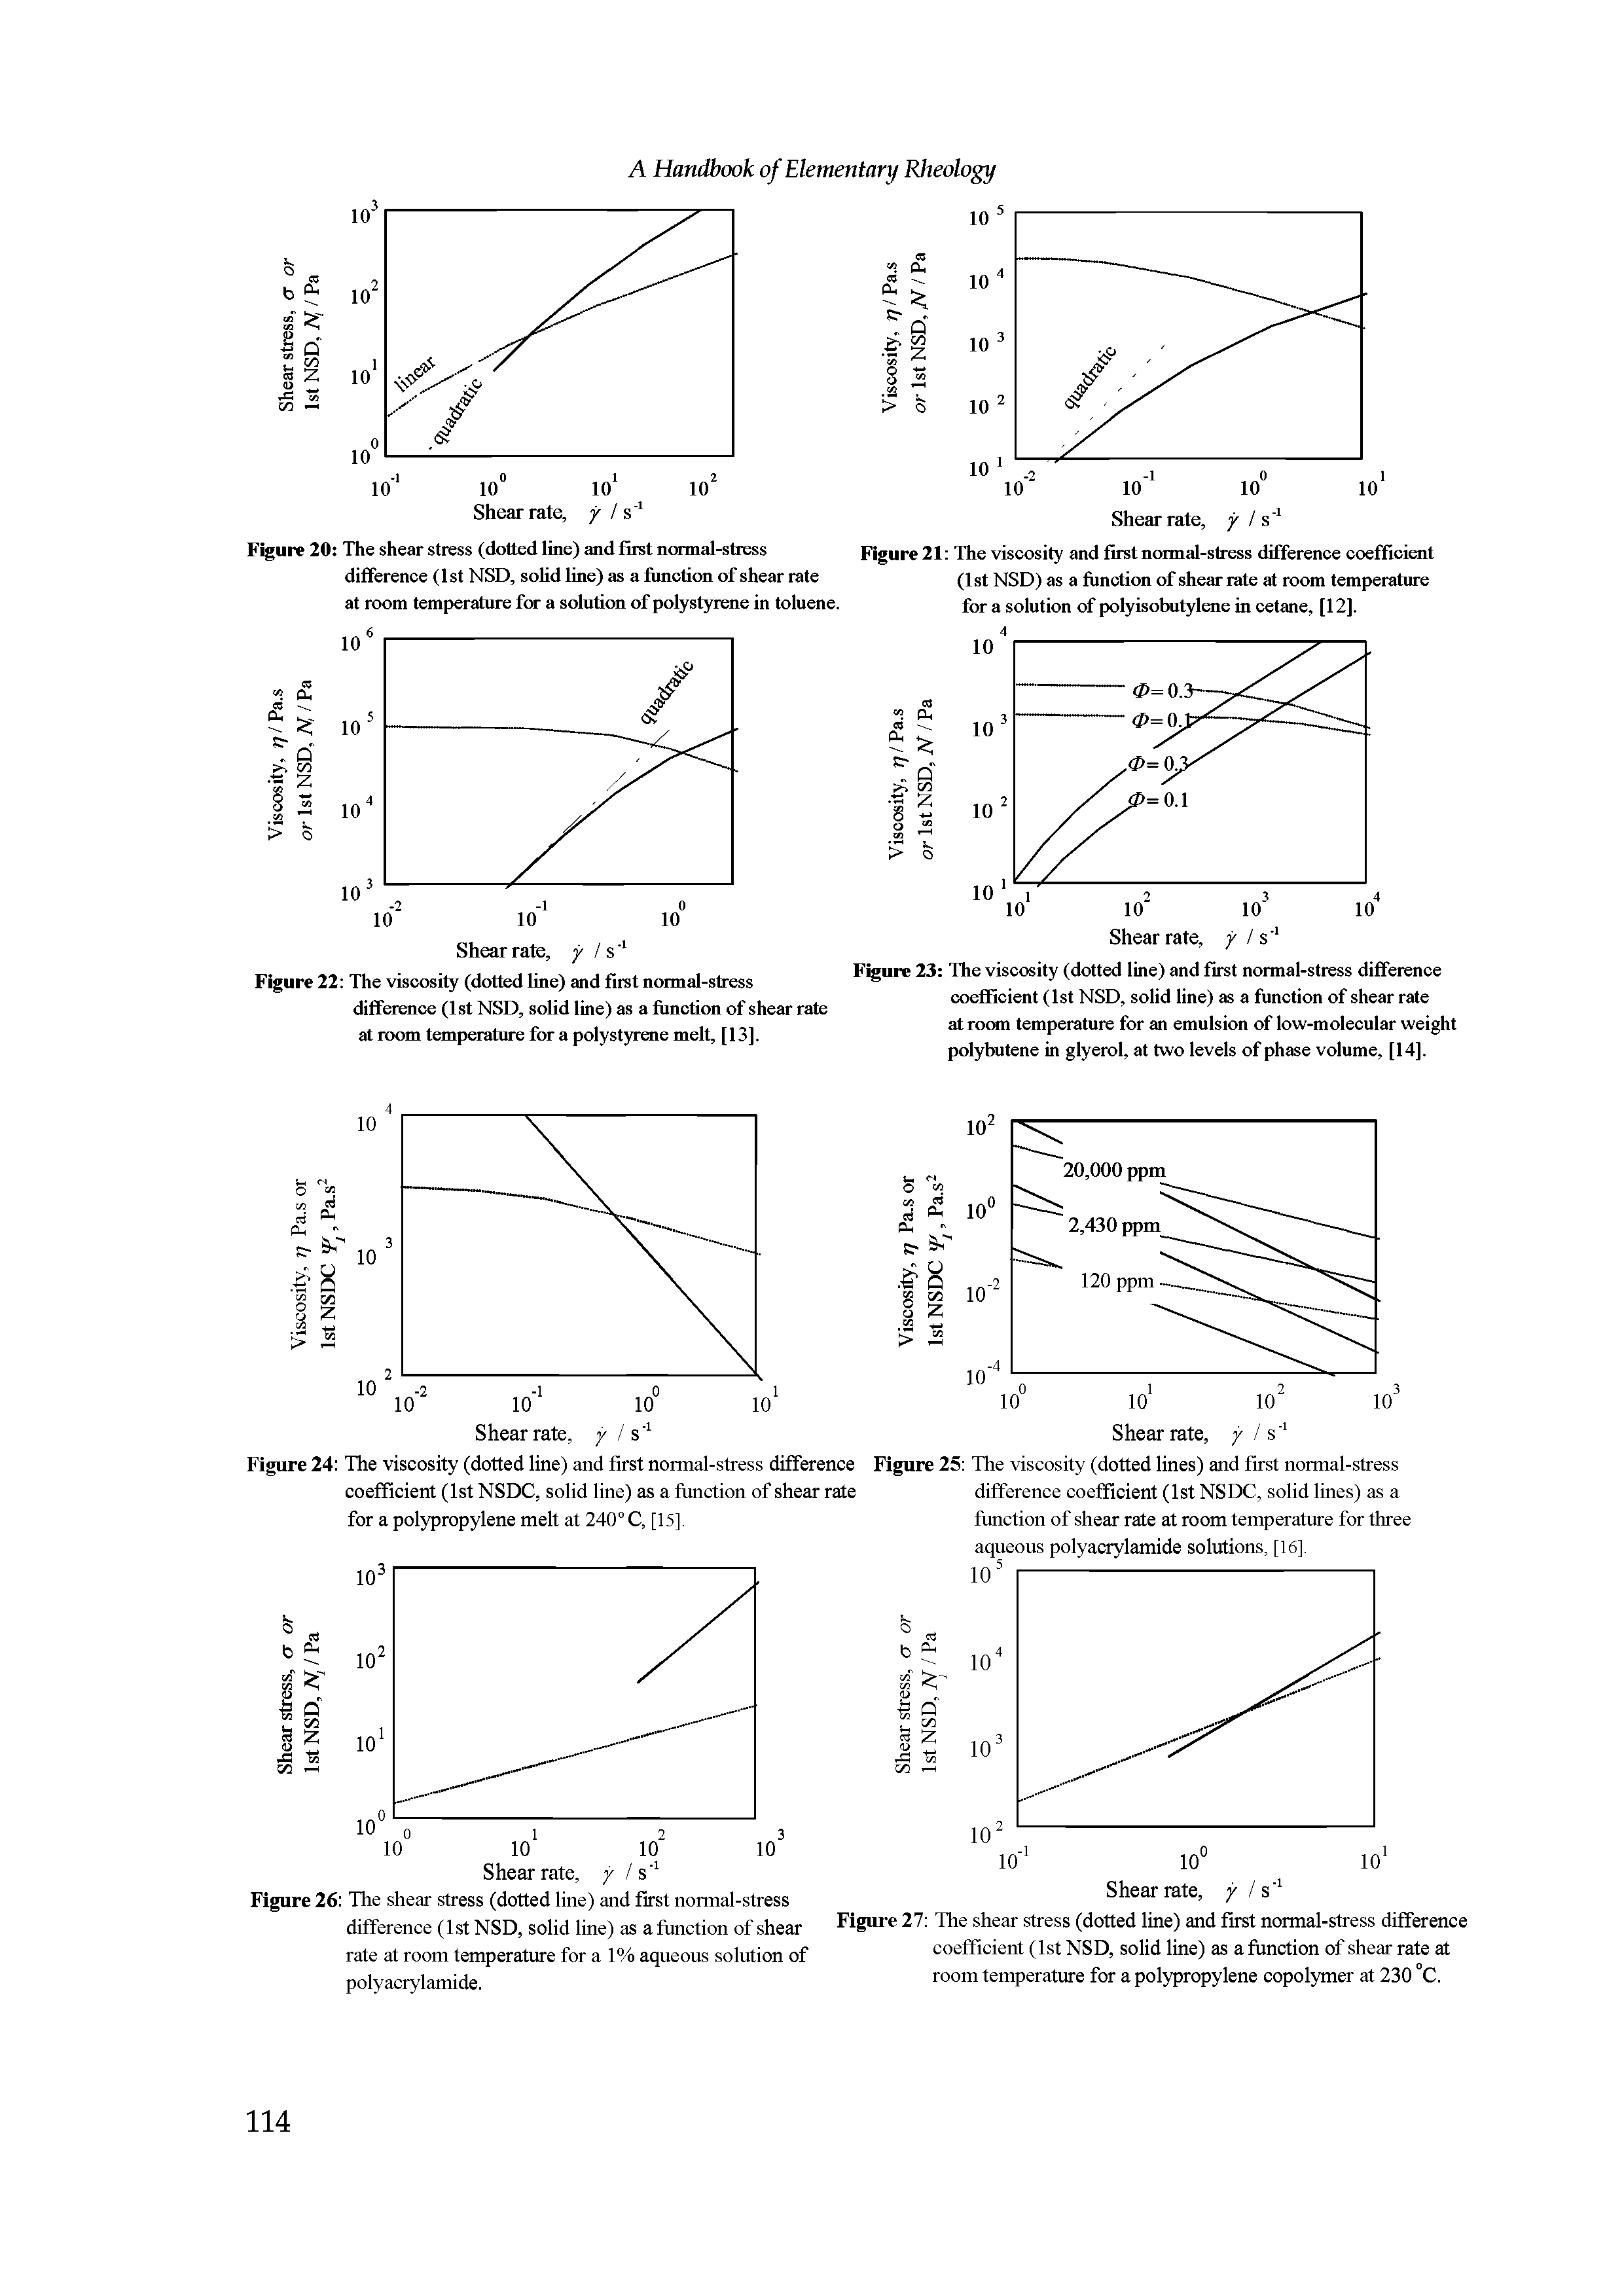 Figure 24 The viscosity (dotted line) and first normal-stress difference coefficient (1st NSDC, solid line) as a function of shear rate for a polypropylene melt at 240° C, [15],...